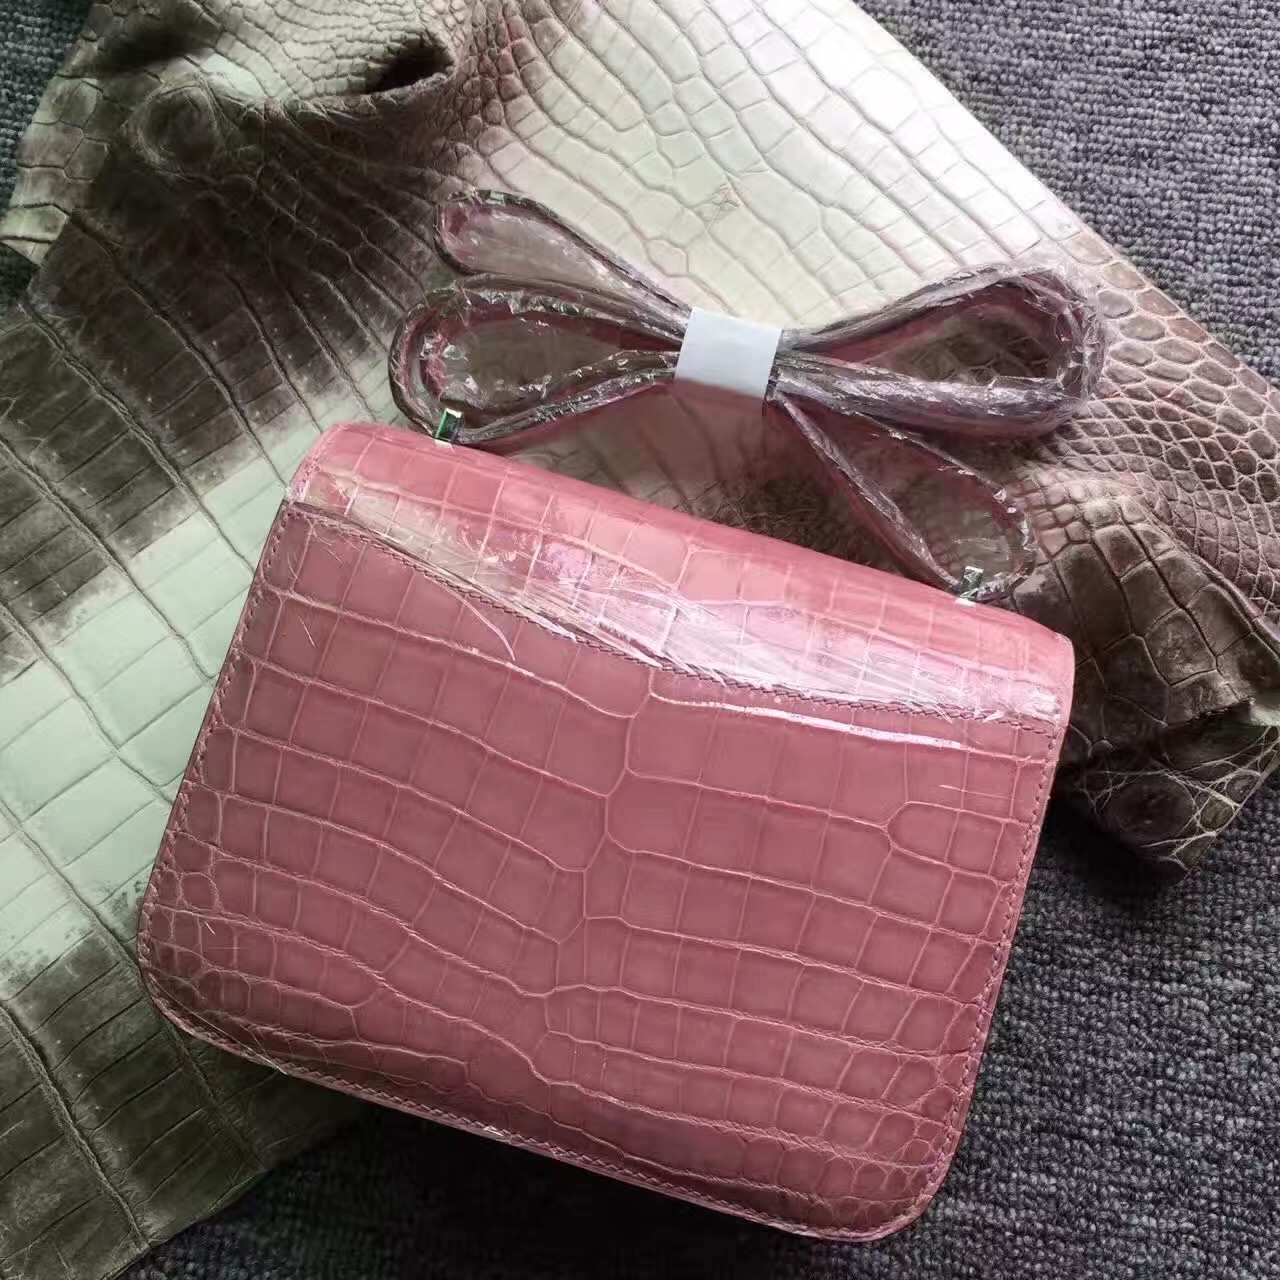 New Arrival Hermes Crocodile Shiny Leather Constance Bag18cm in Light Pink